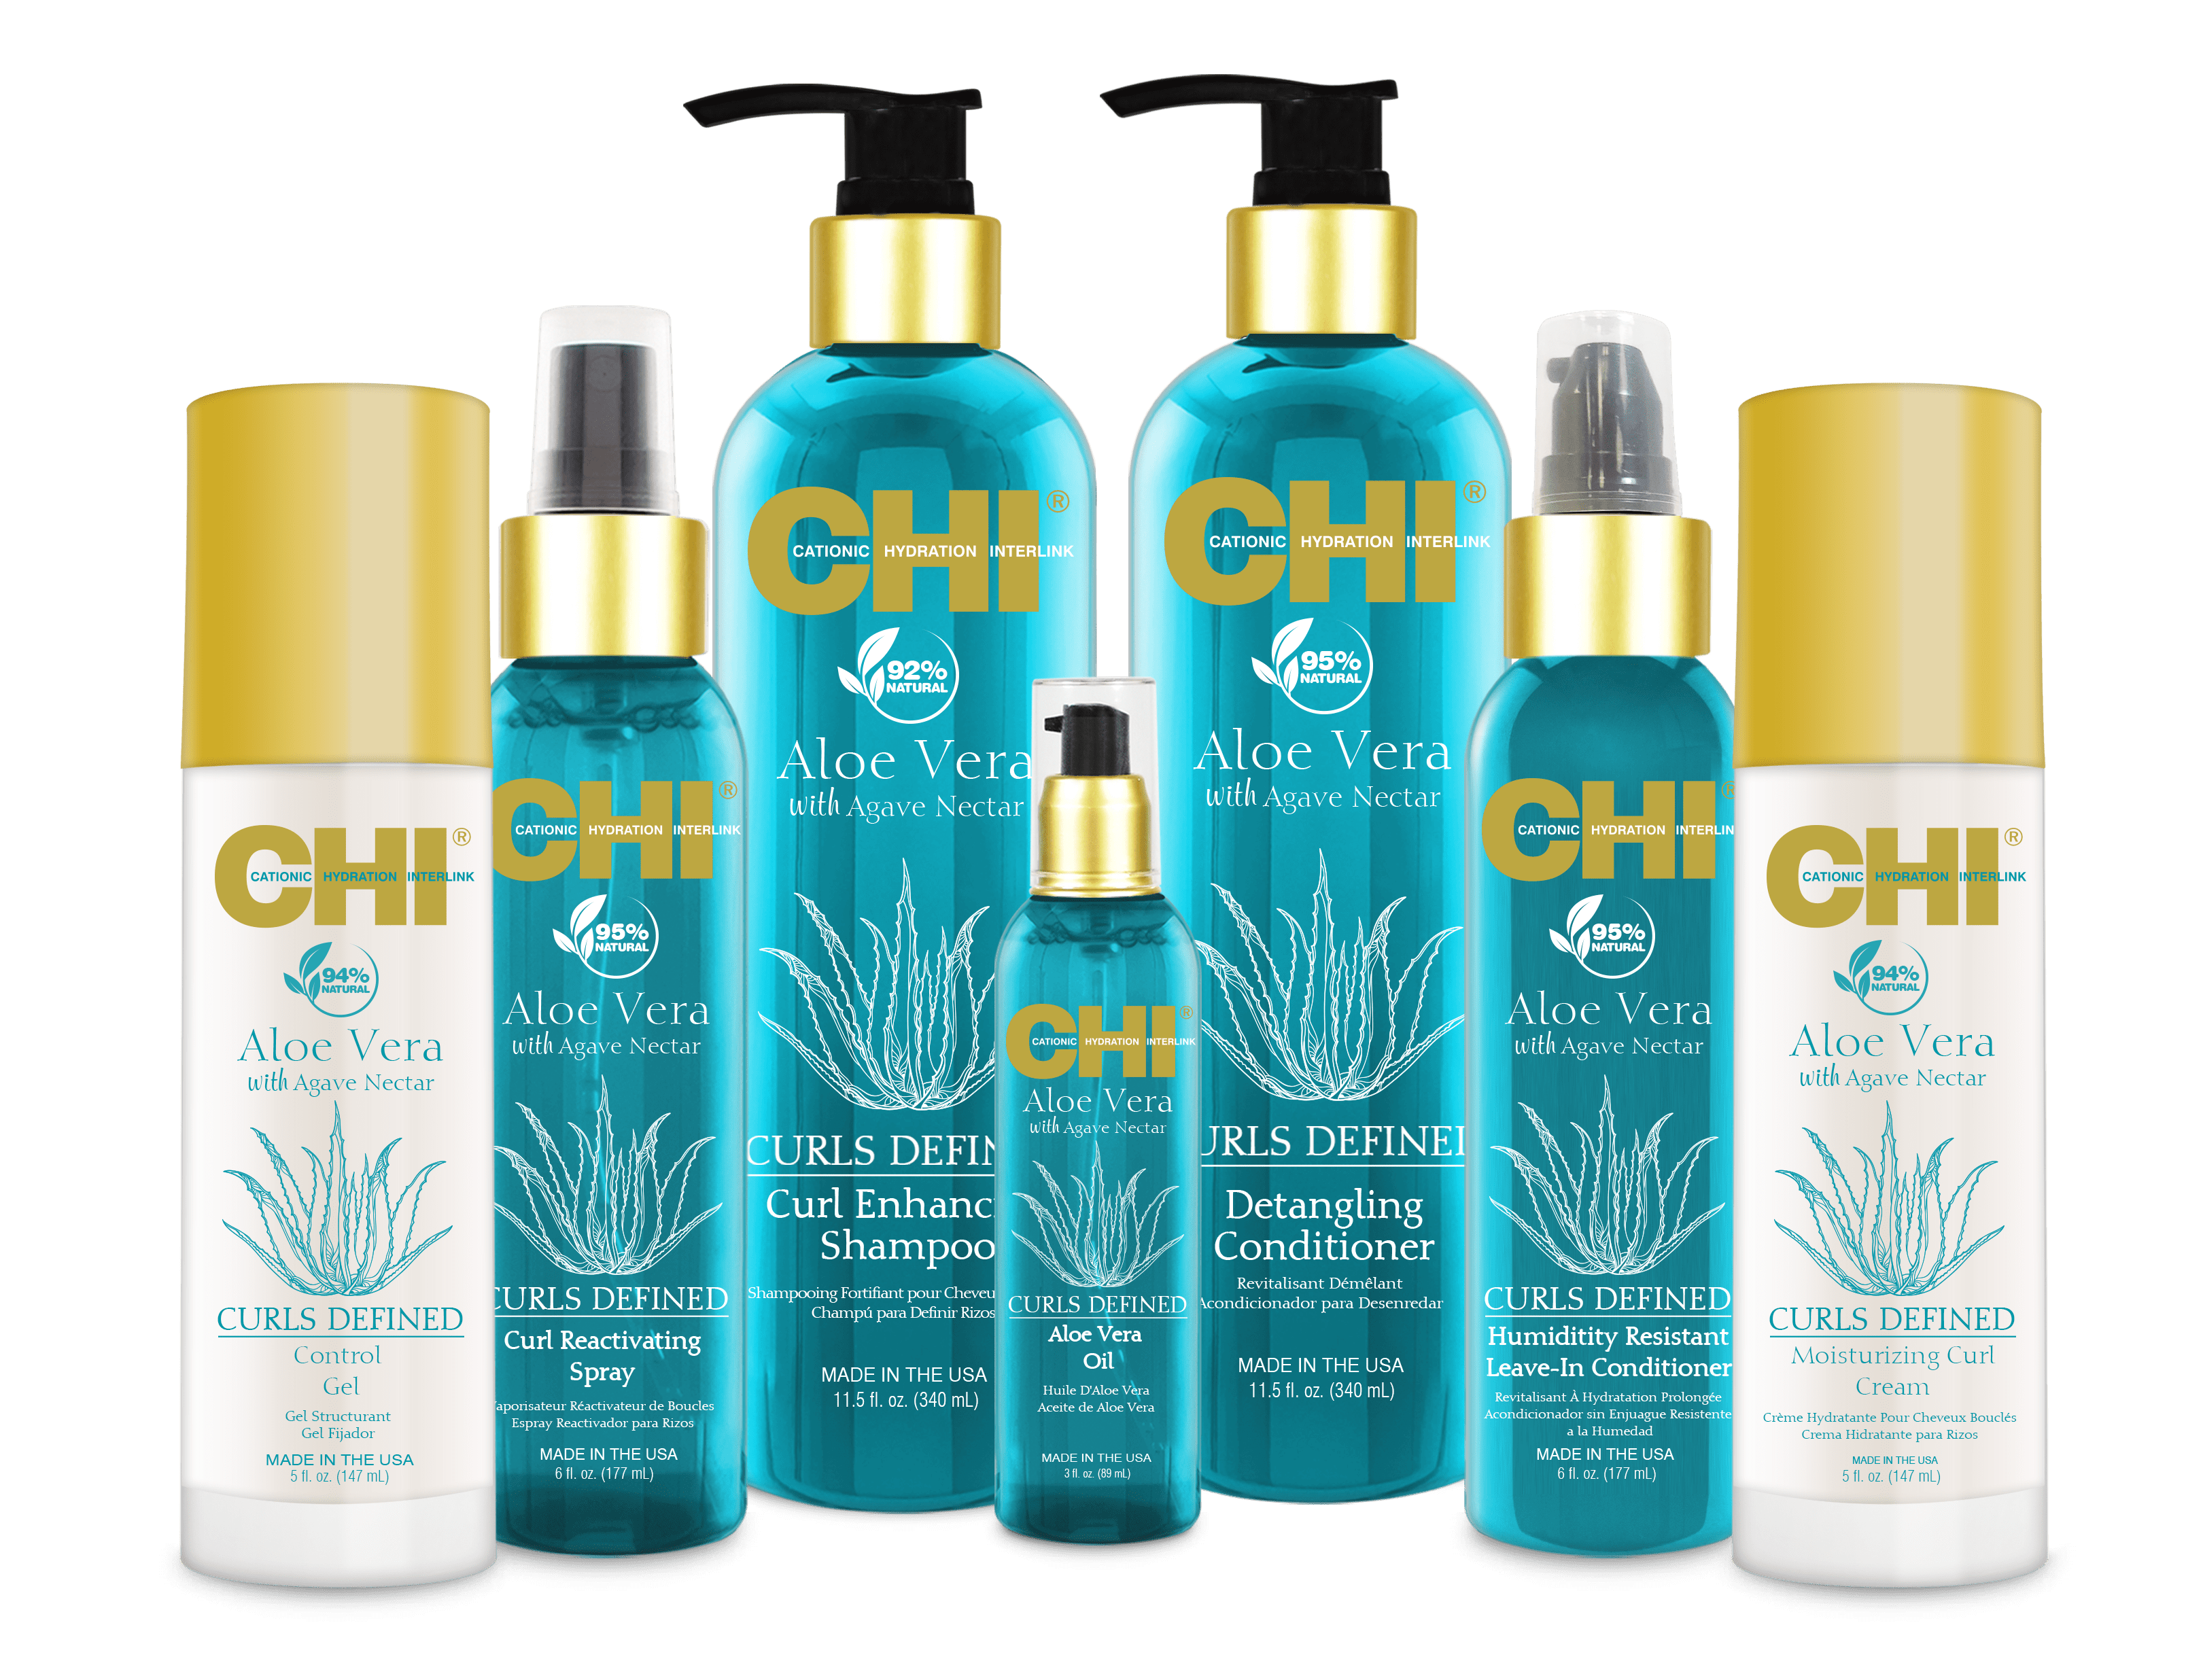 4. Top Brands of Blue Agave Nectar Hair Products - wide 2